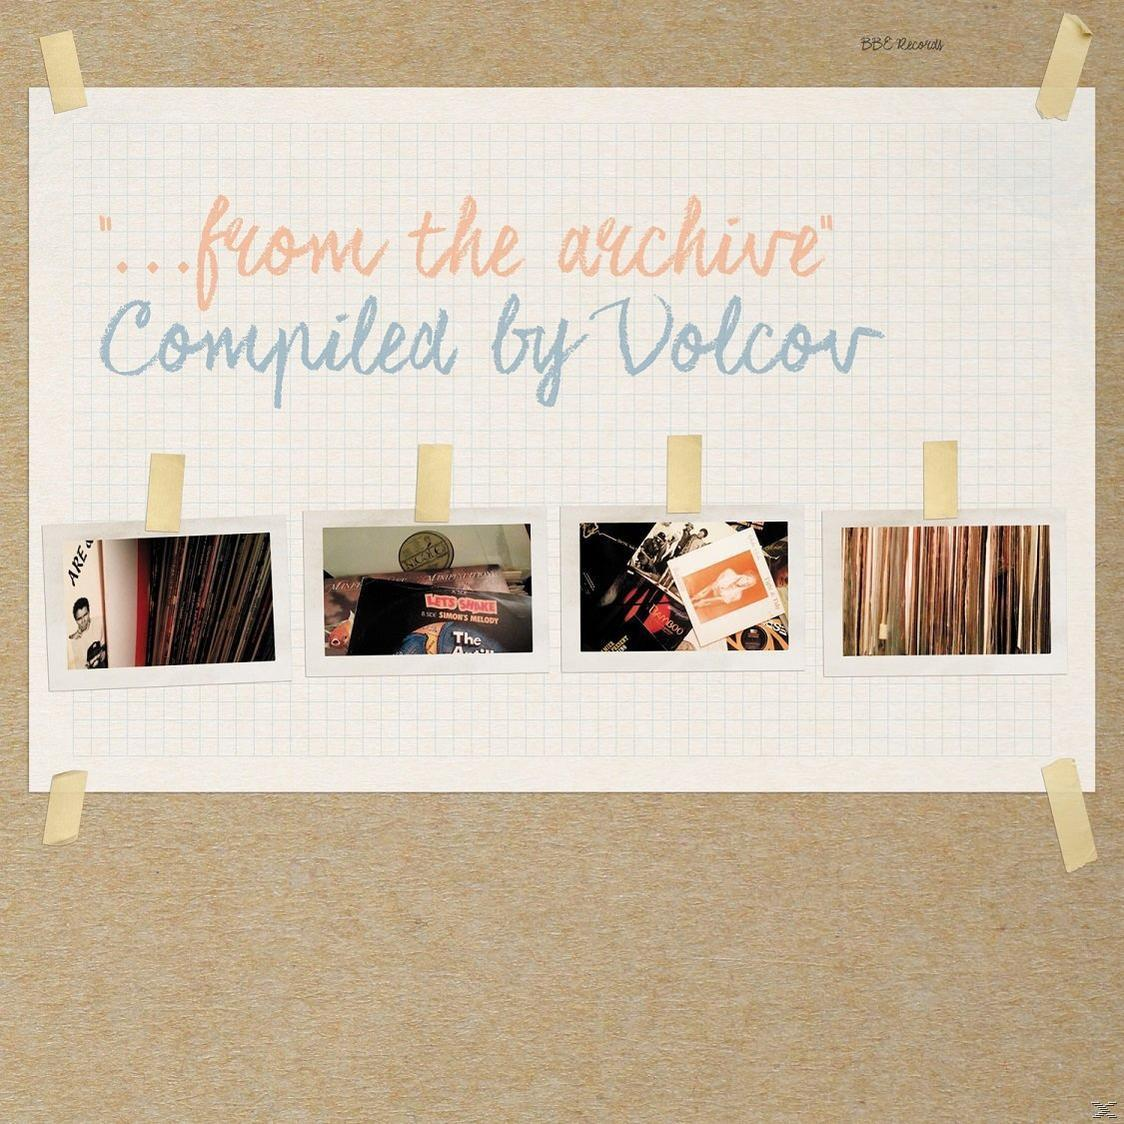 Archive (Vinyl) - From - VARIOUS Volcov, The